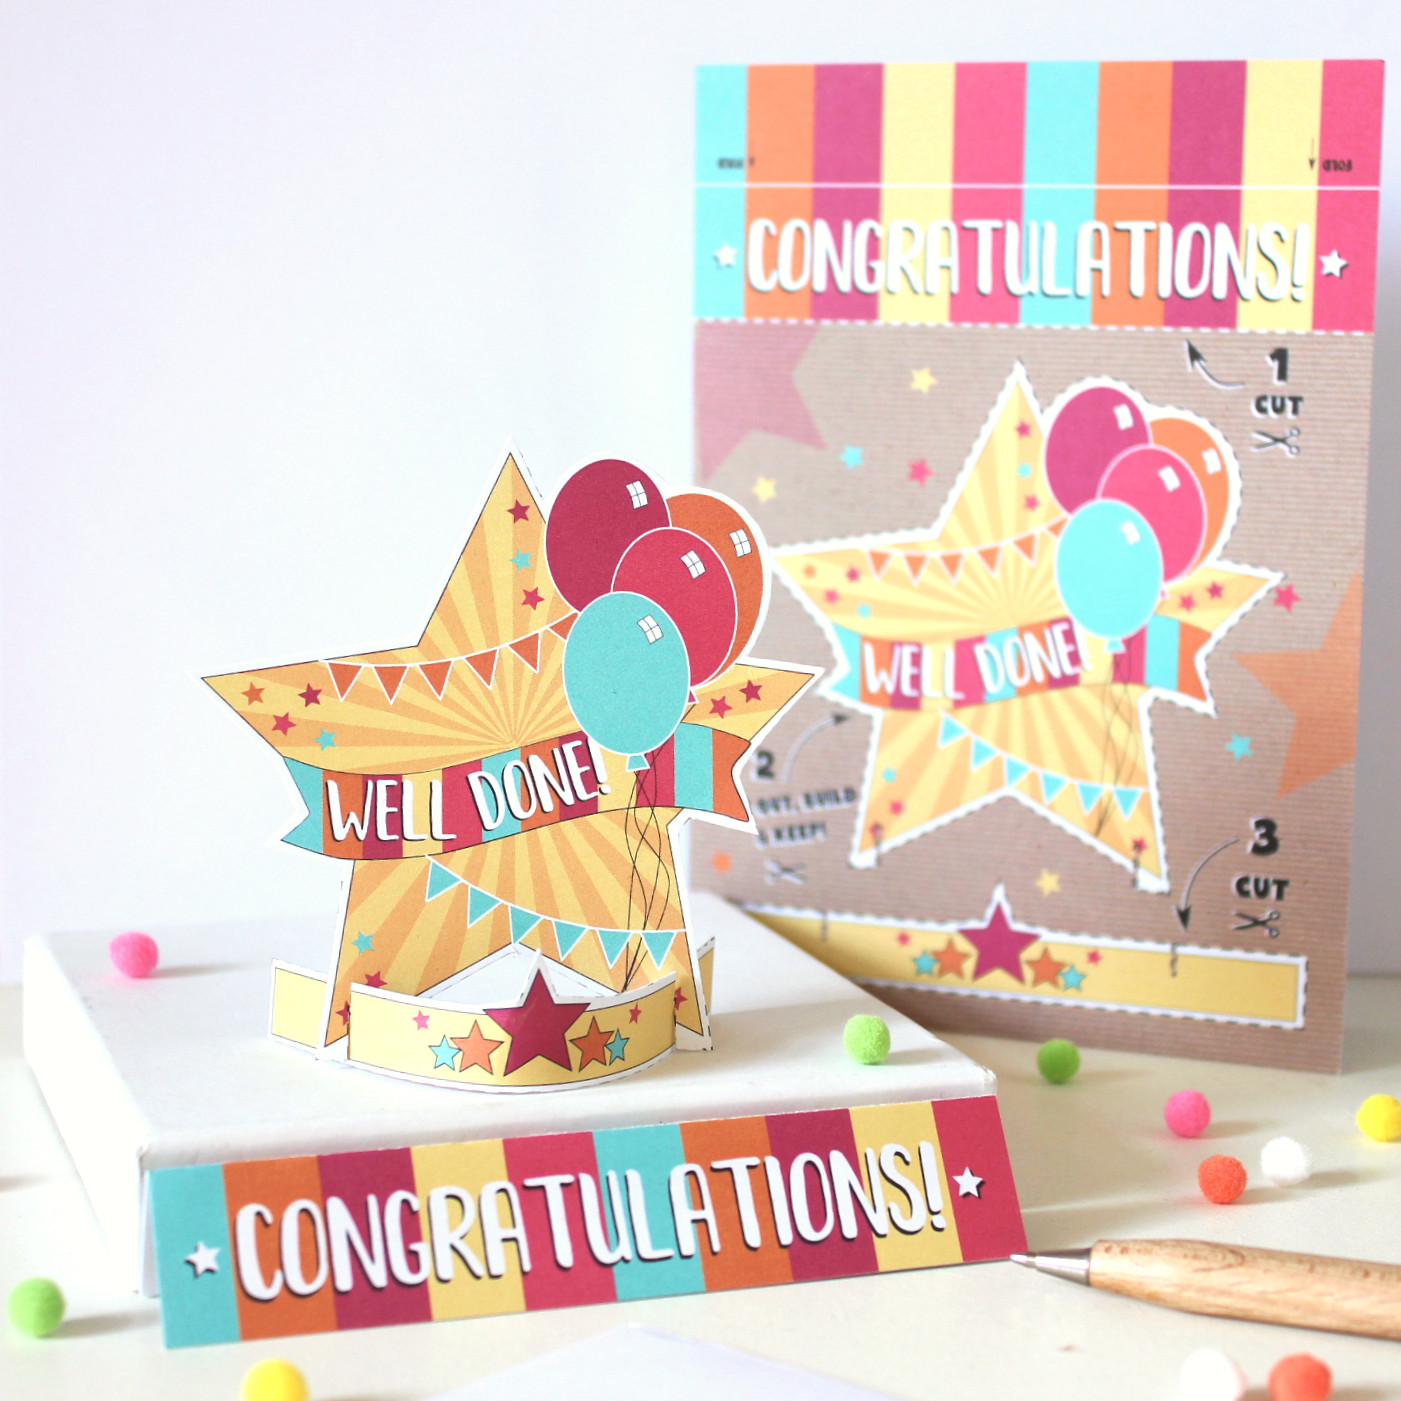 Congratulations Bright Star, Cut Out and Keep Cards